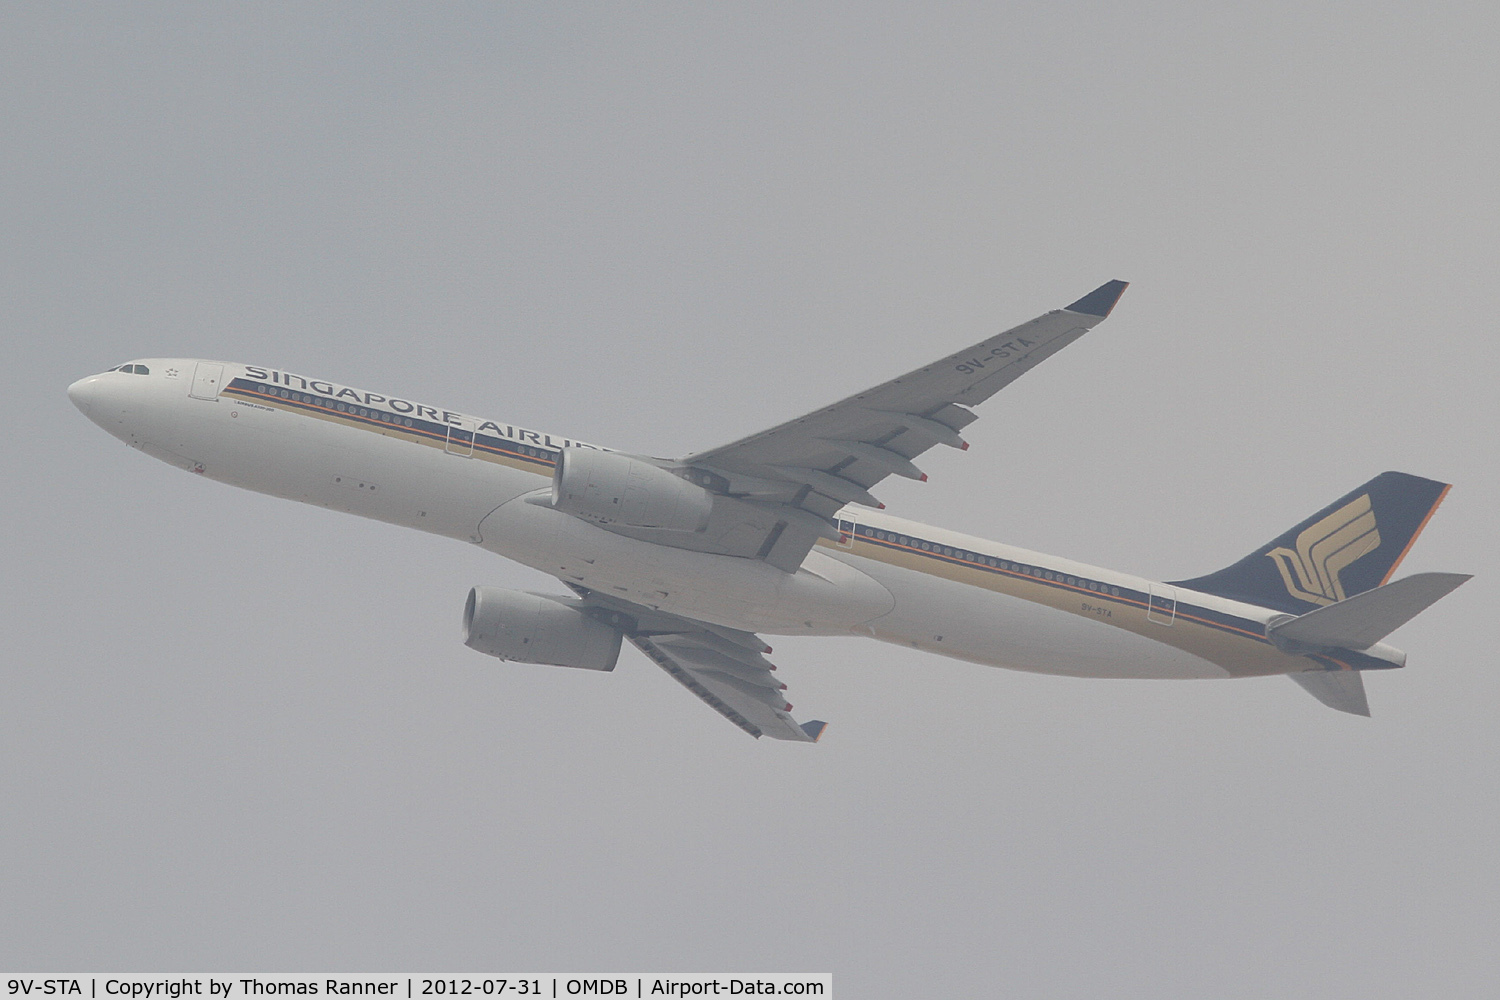 9V-STA, 2008 Airbus A330-343E C/N 978, Singapore Airlines Airbus A330